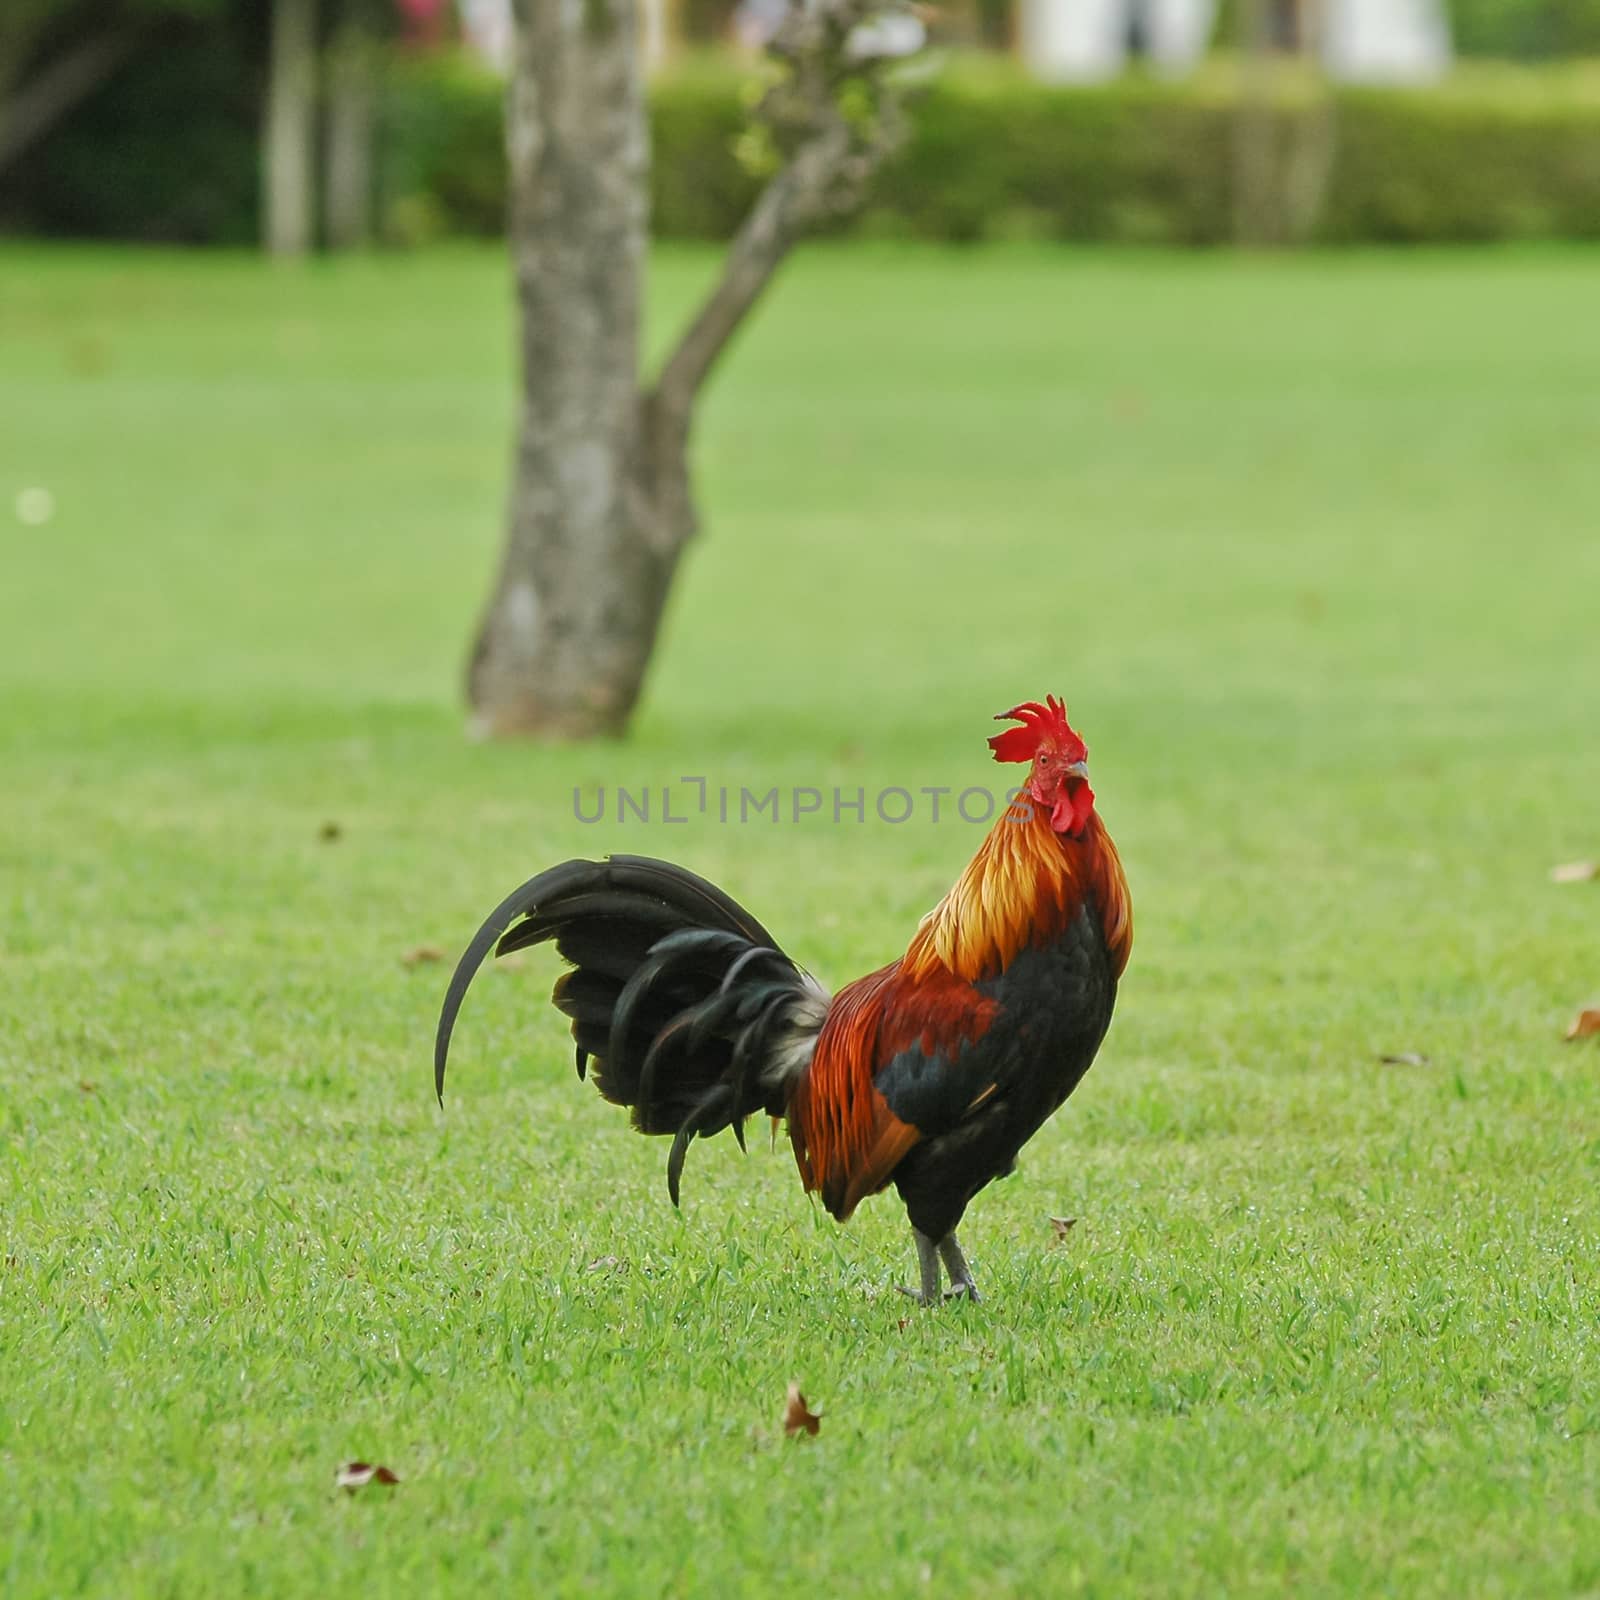 Lively chicken on the grass by eyeofpaul